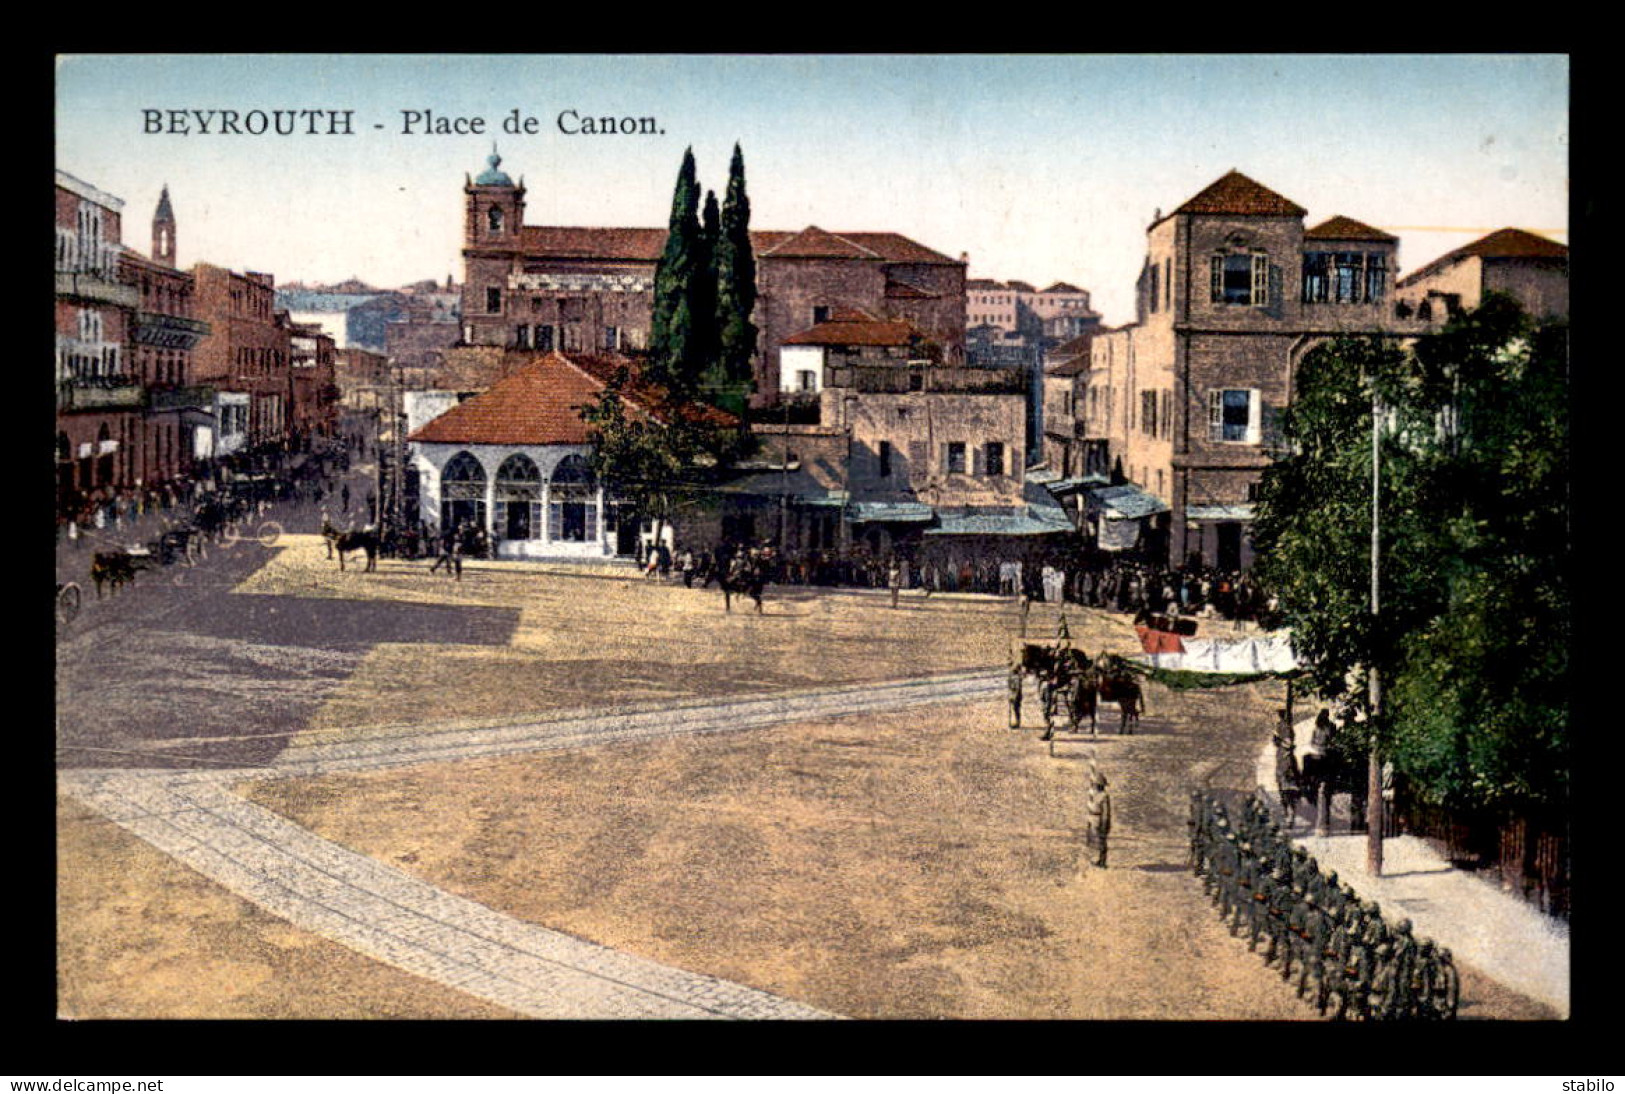 LIBAN - BEYROUTH - PLACE DES CANONS - CARTE COLORISEE - Libanon